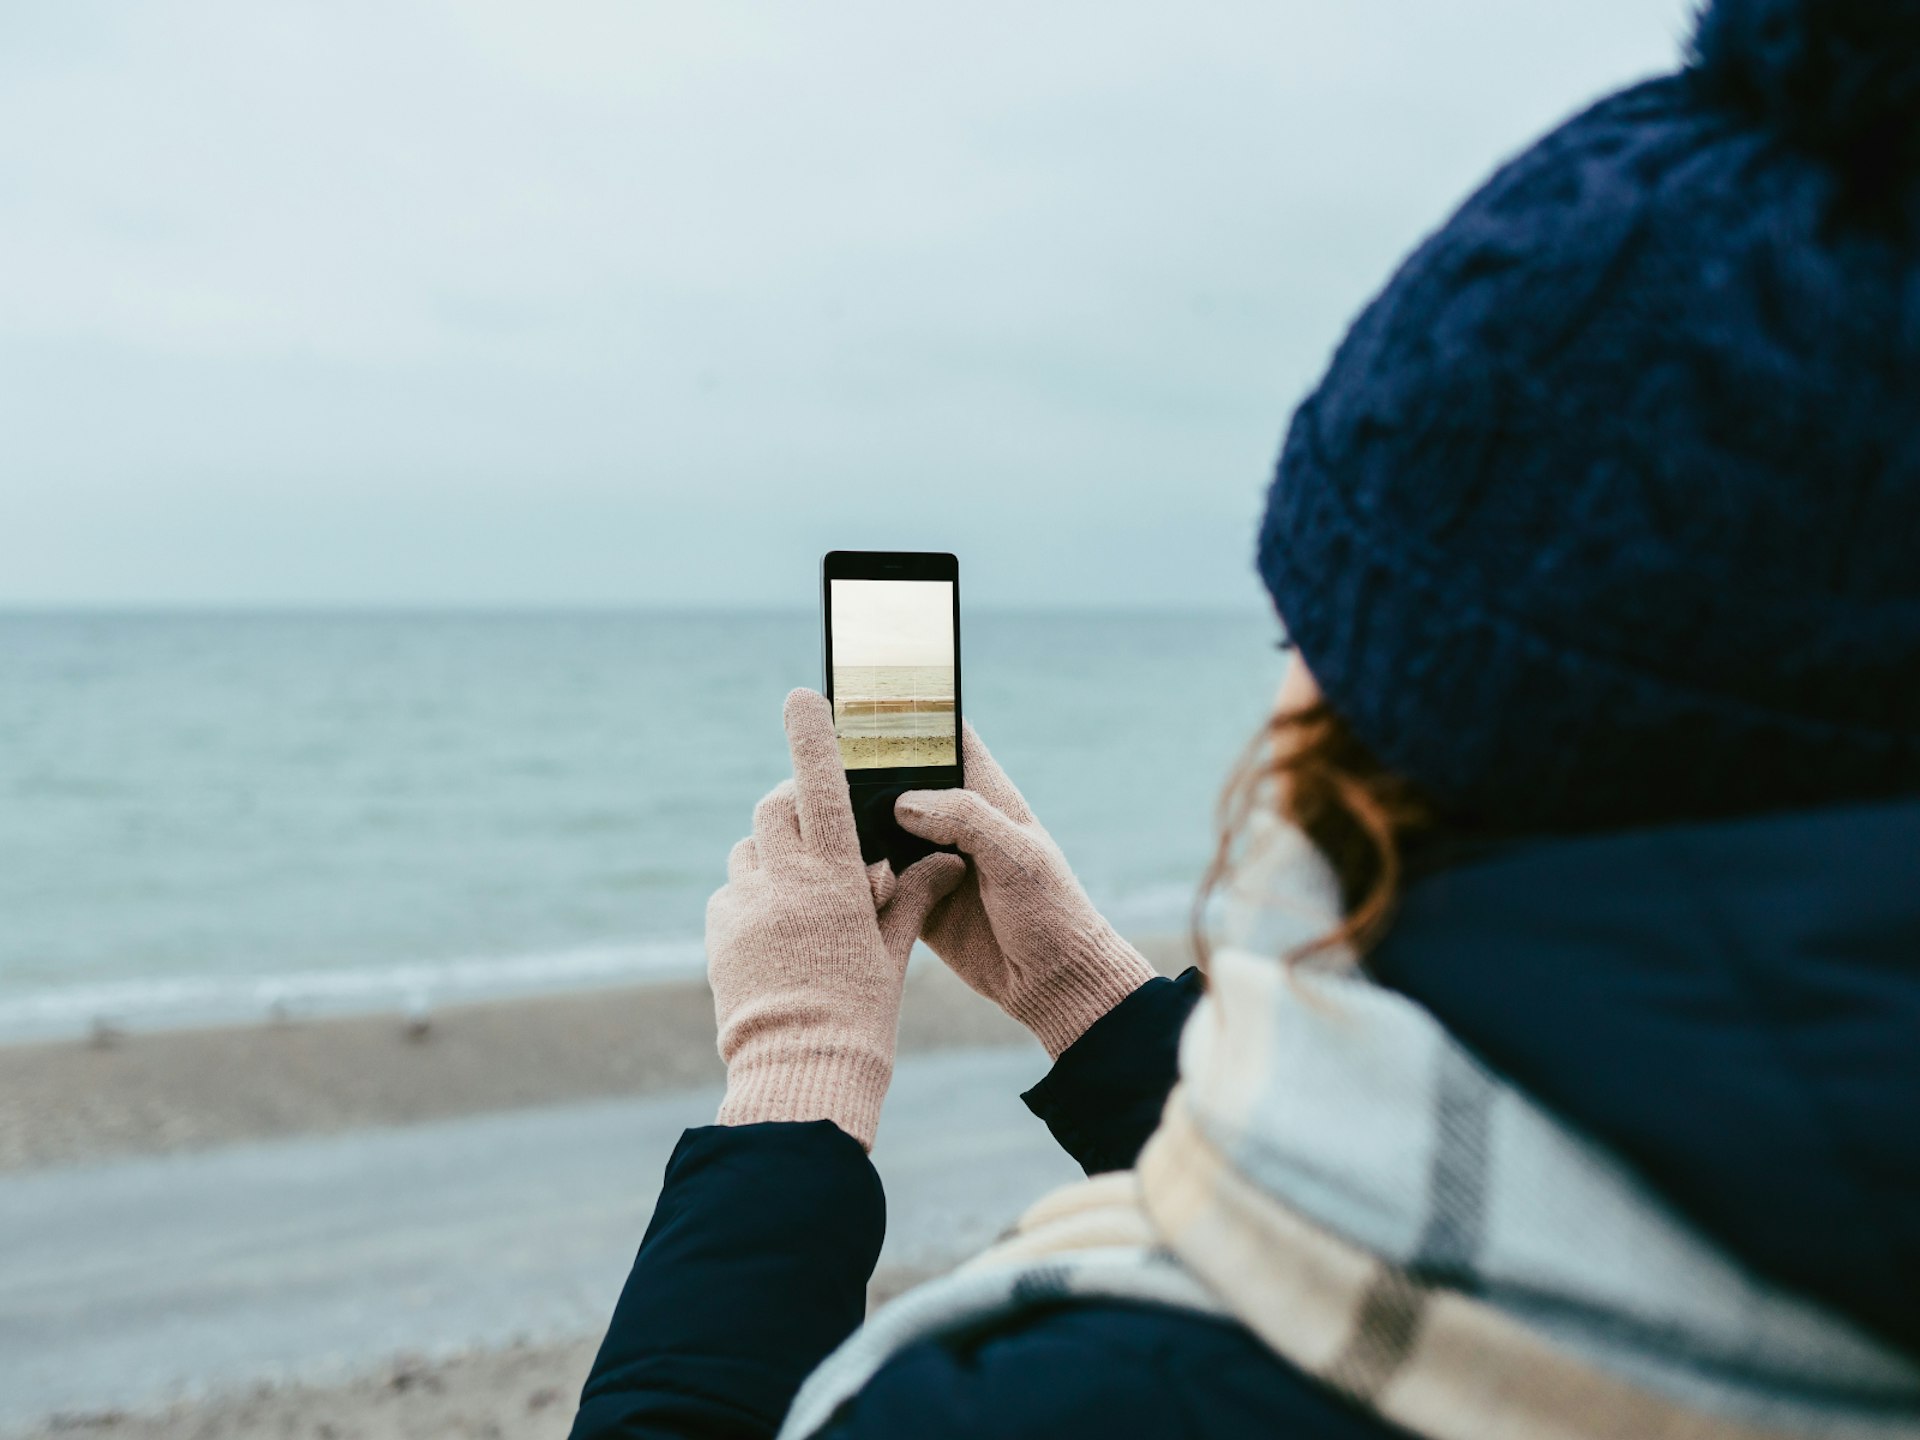 A woman taking a photograph of a beach on her smartphone